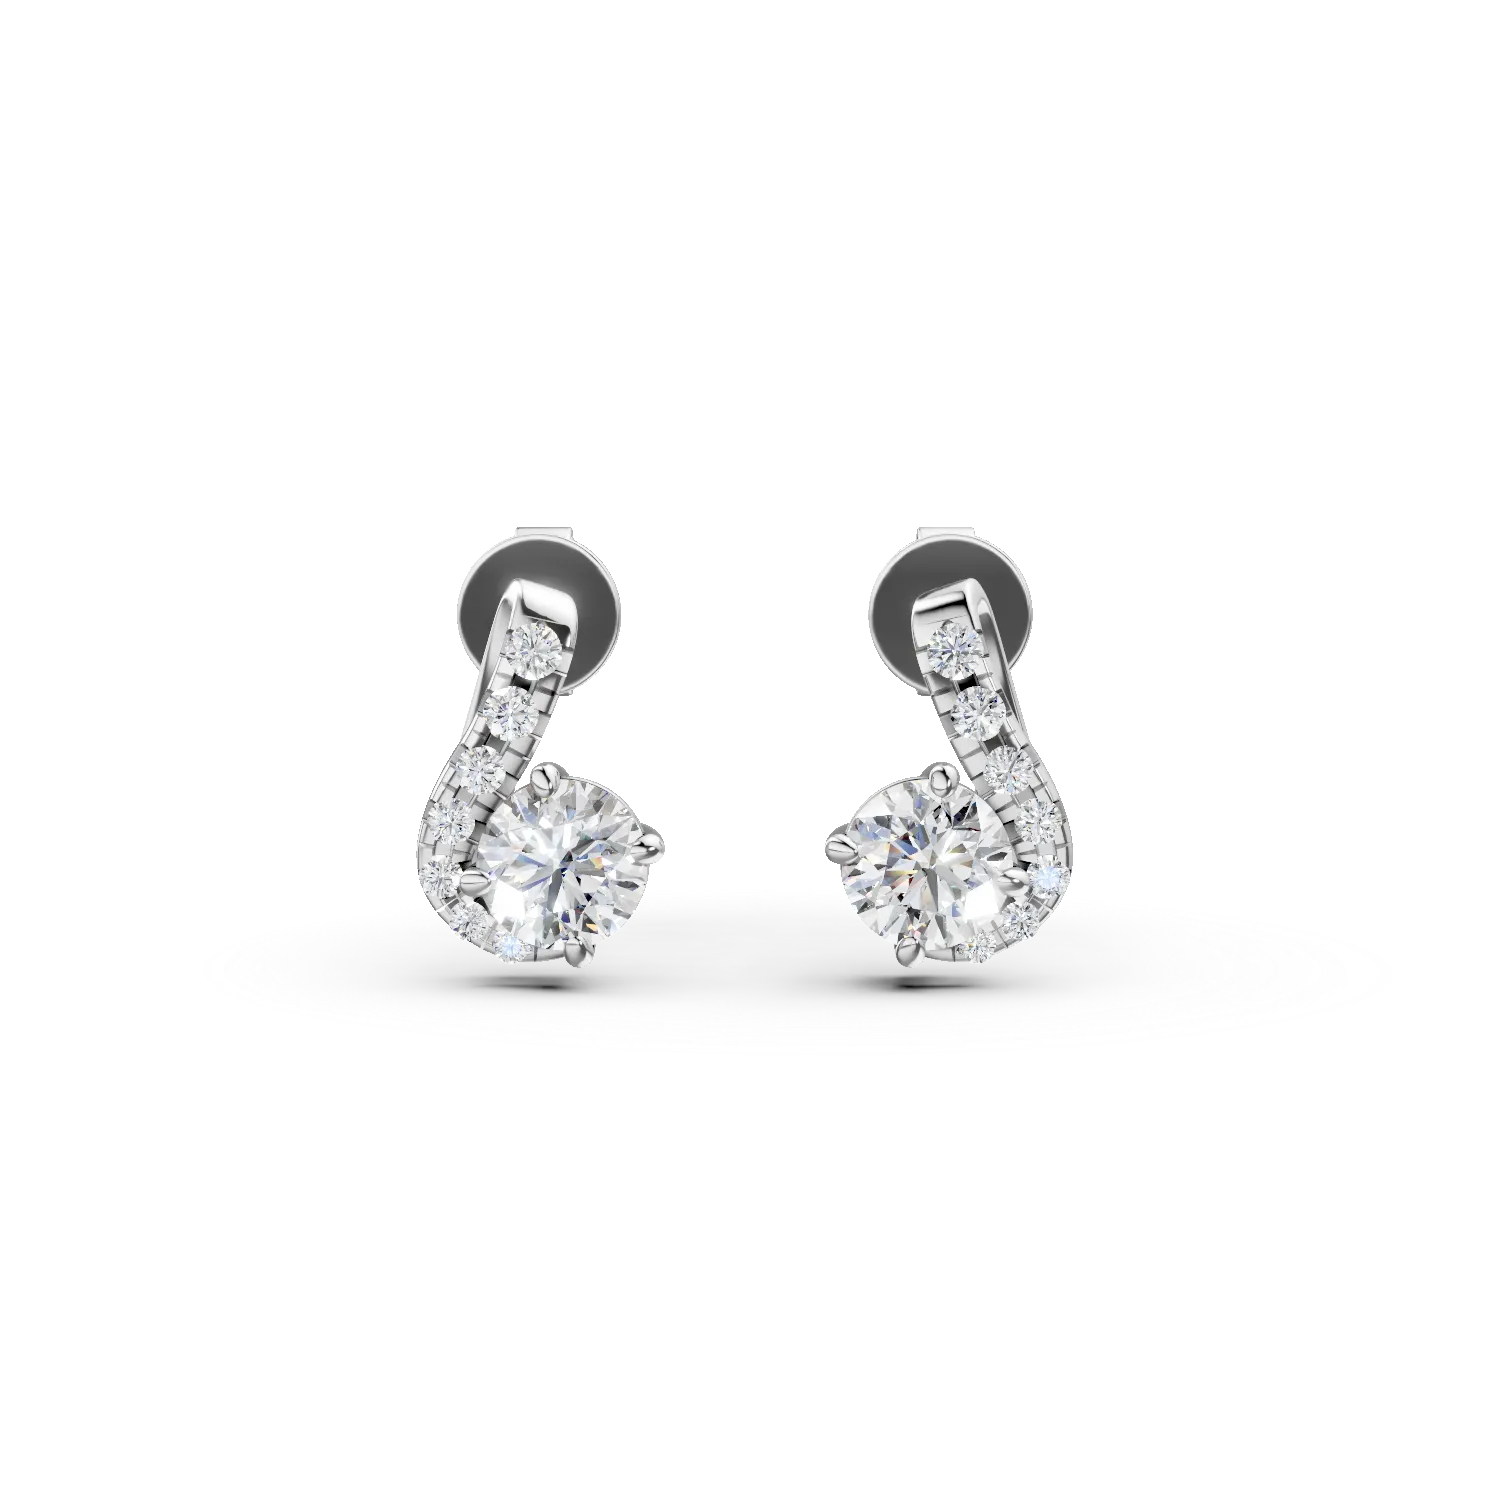 White gold Duet earrings with 0.6ct lab grown diamonds